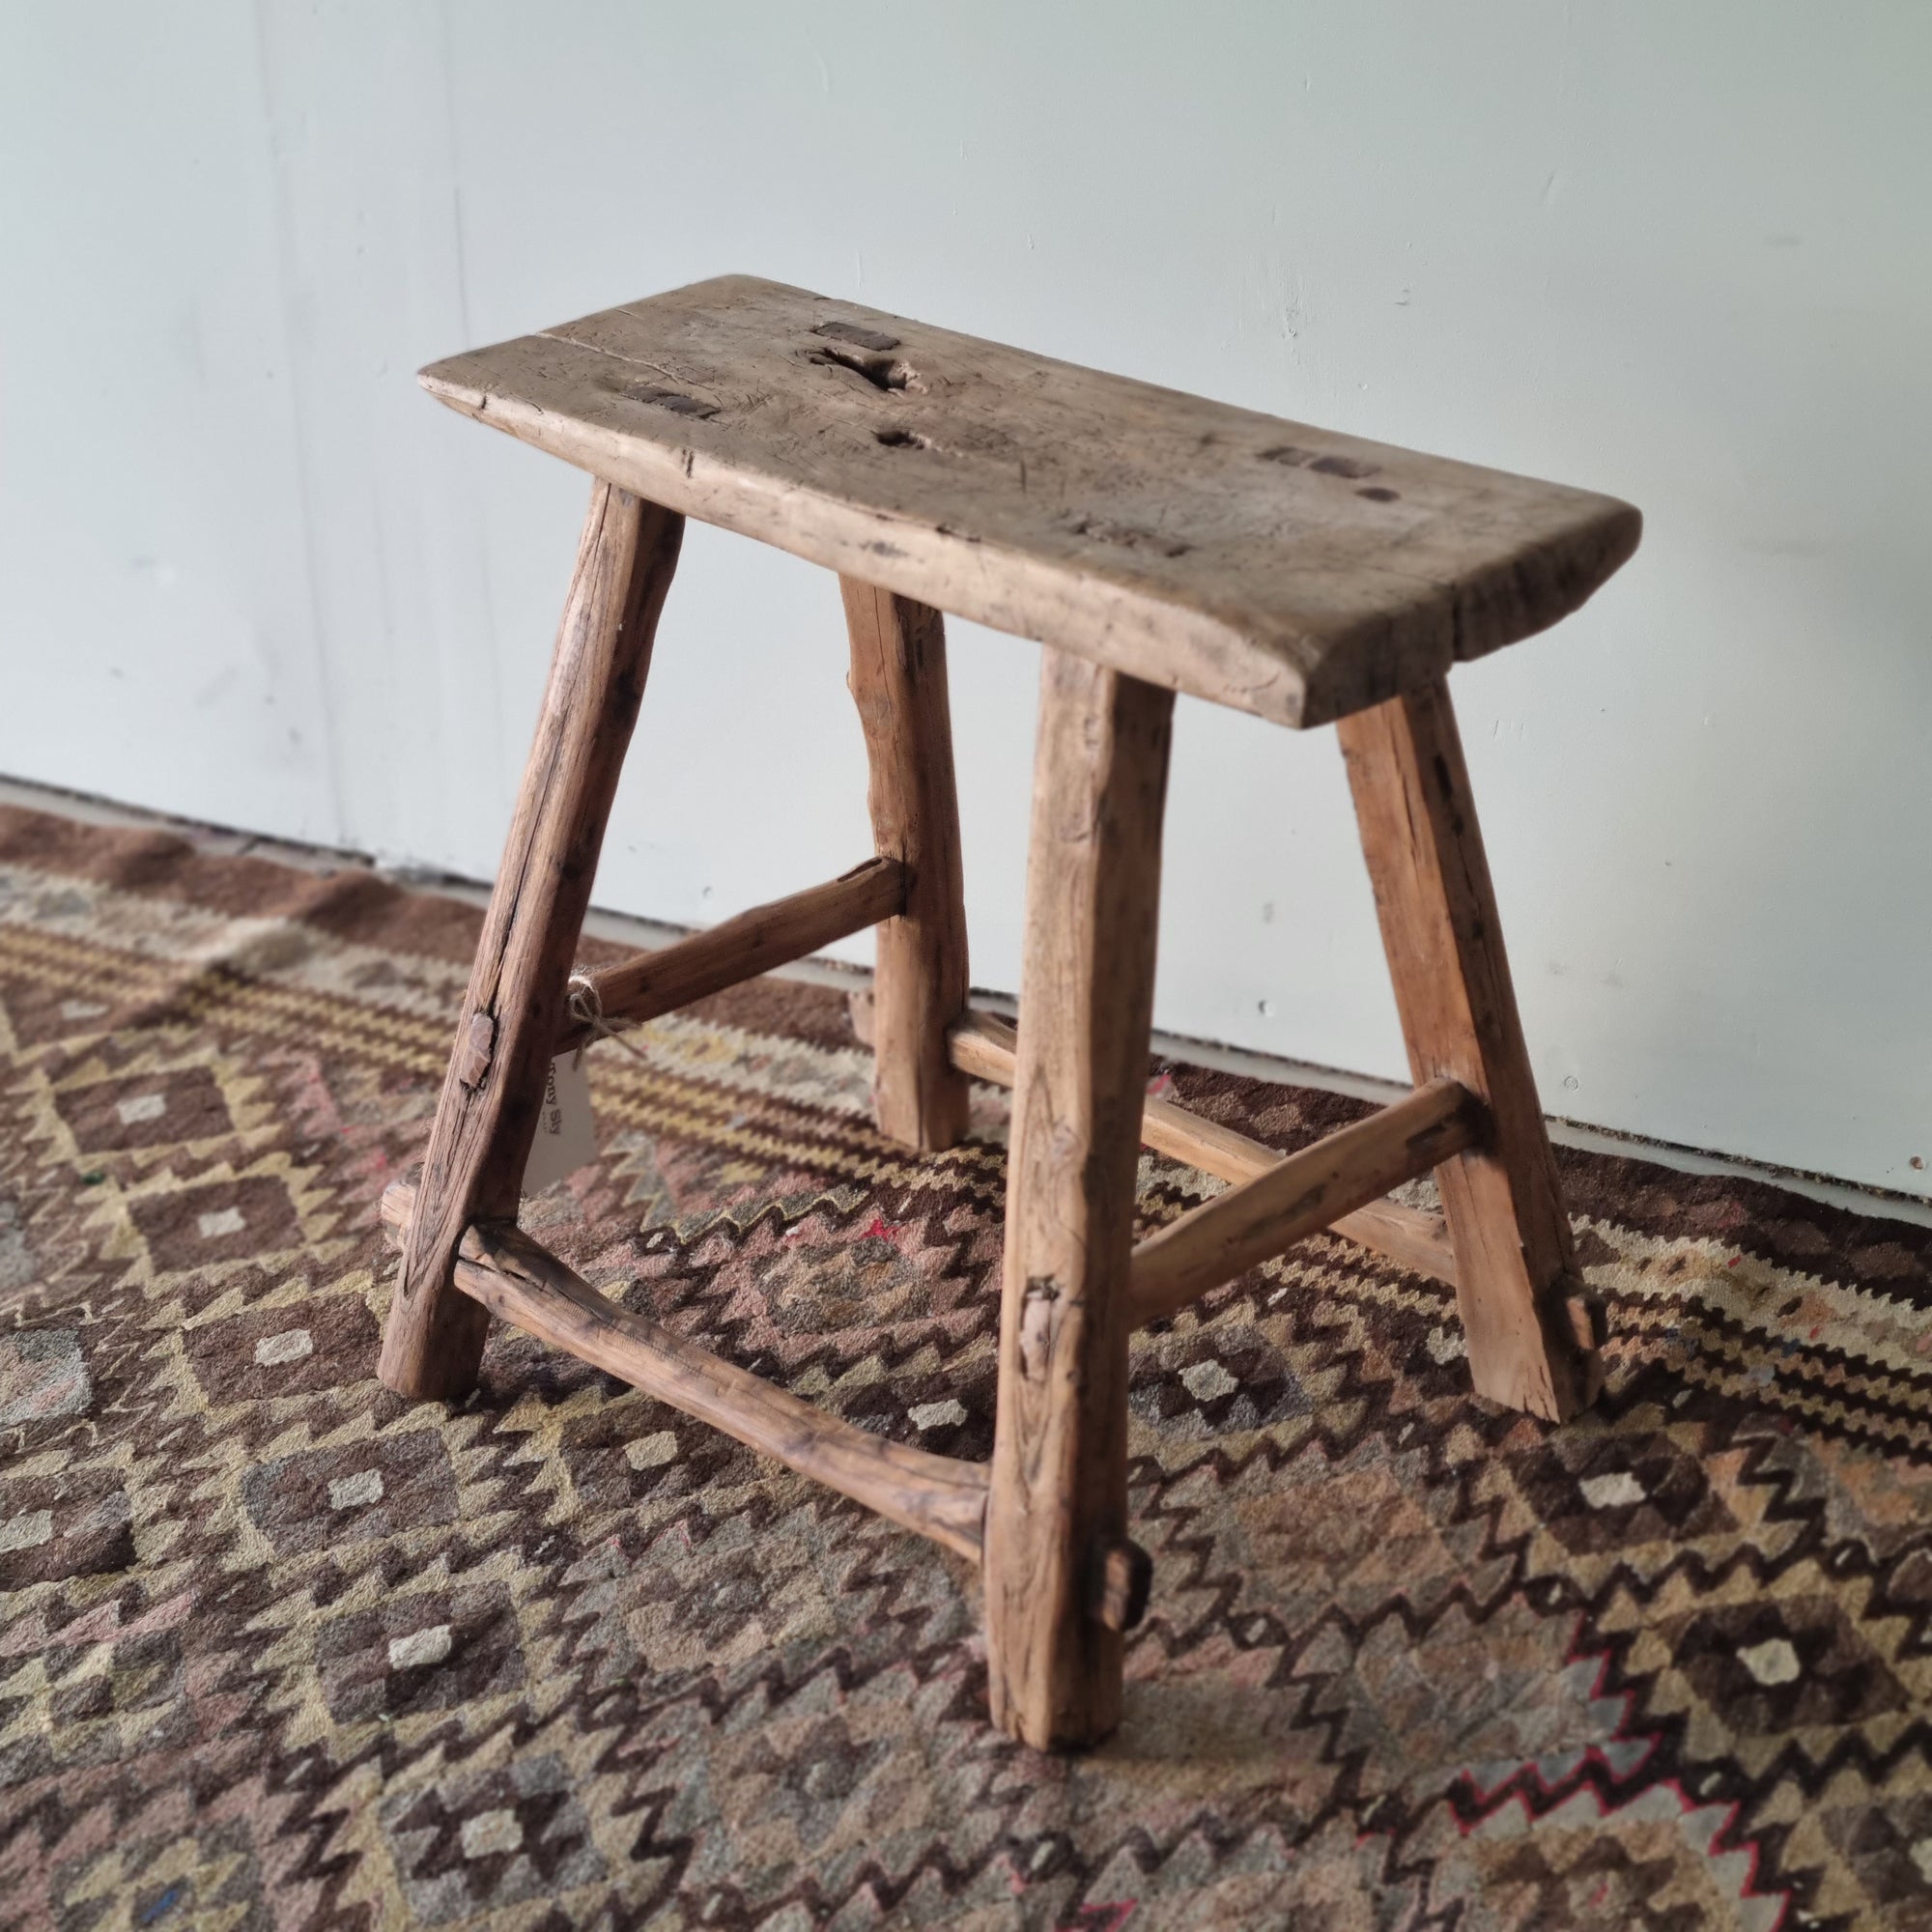 Handcrafted Stool